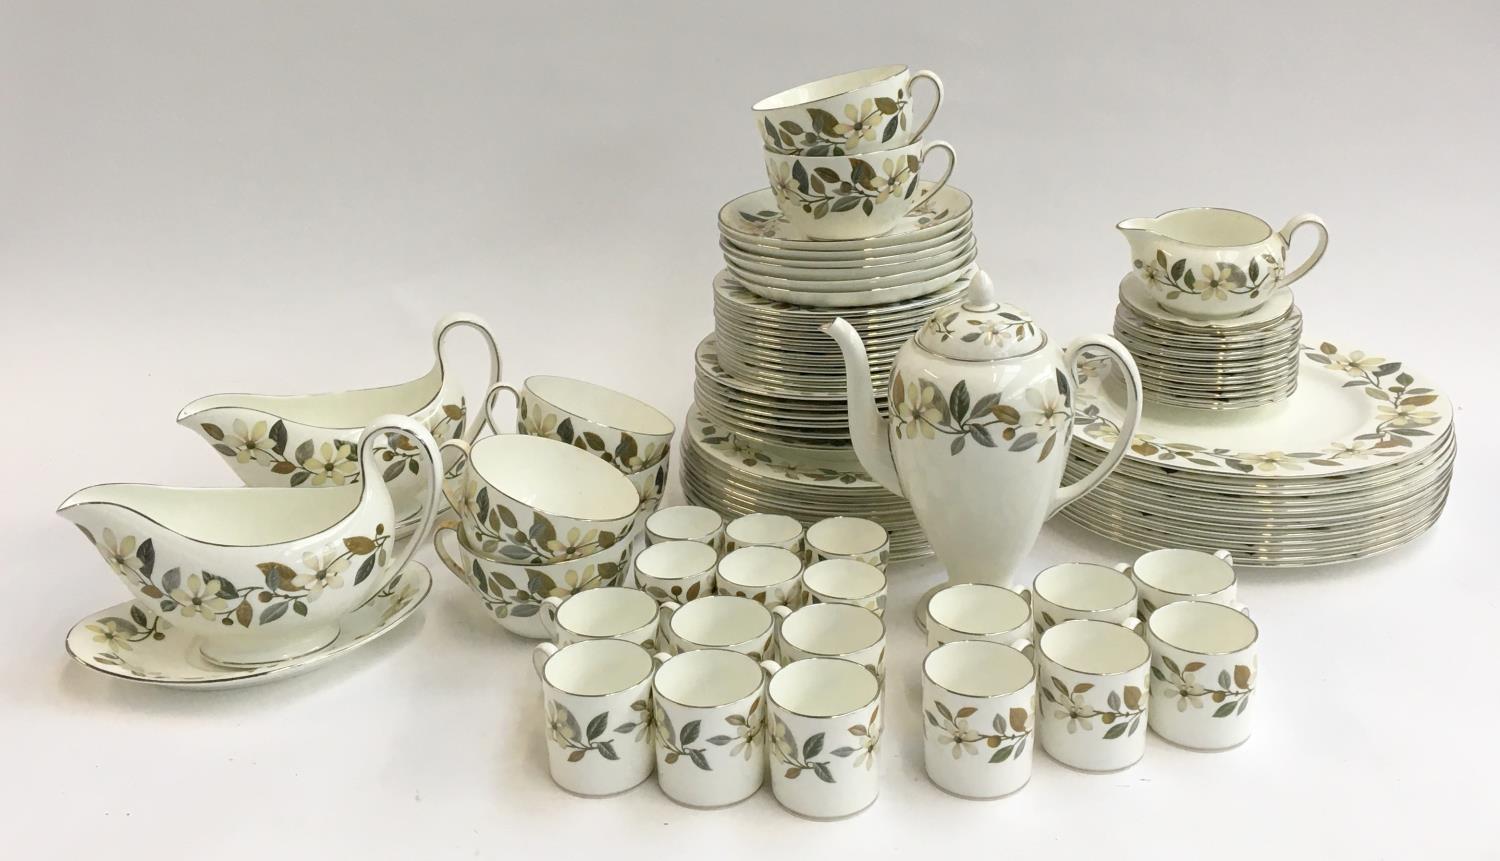 A Wedgwood Beaconsfield dinner service comprising dinner plates, side plates, coffee cans, coffee